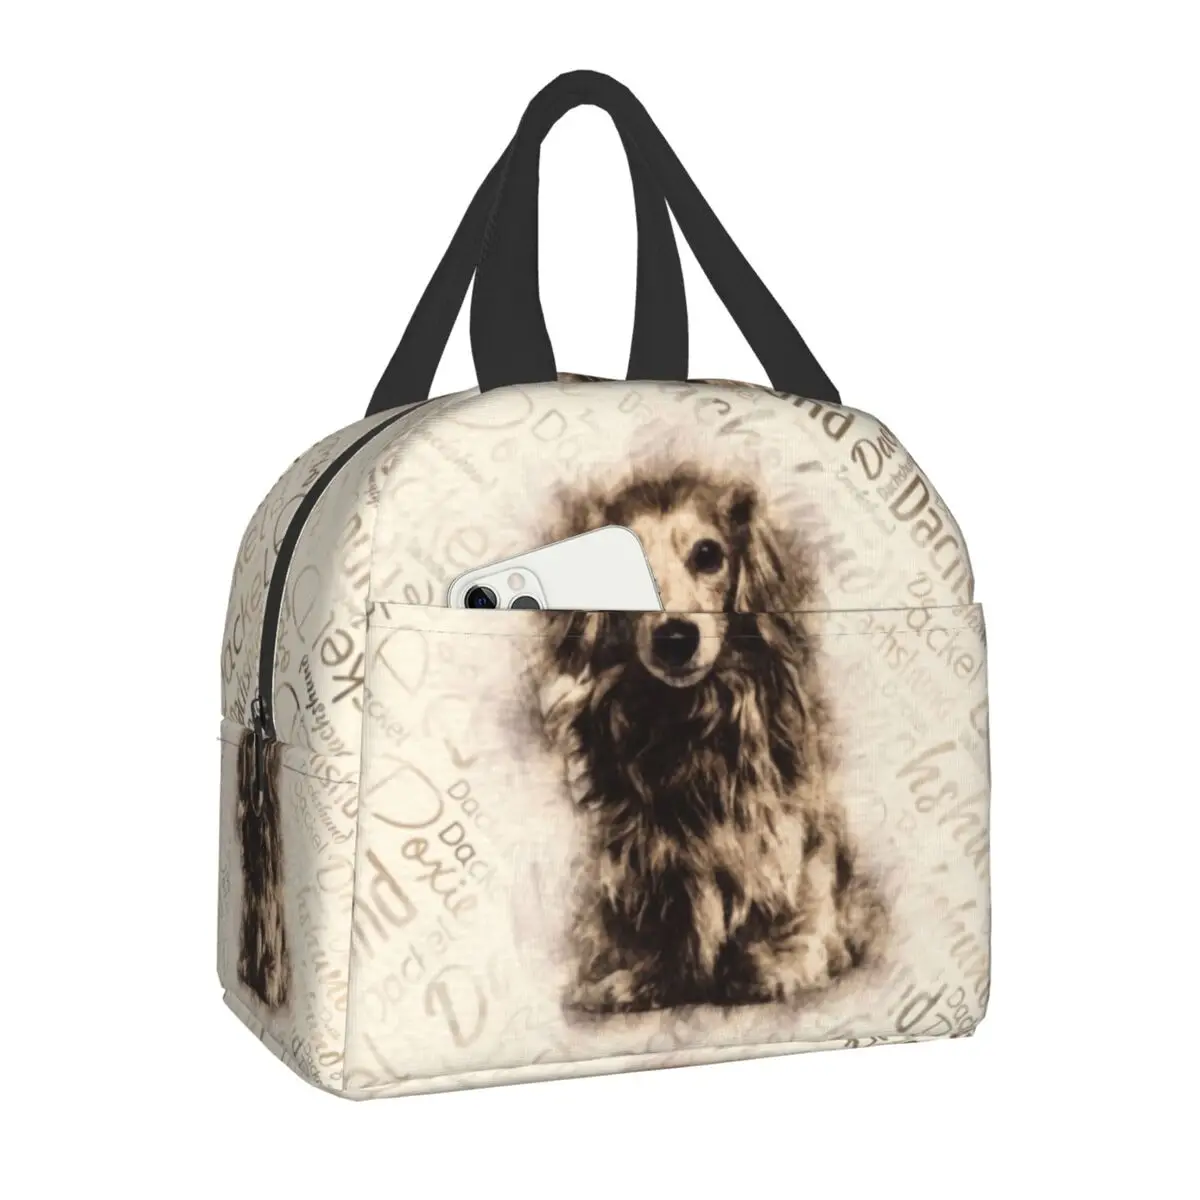 Longhaired Dachshund Dog Insulated Lunch Bag for Women Portable Badger Sausage Wiener Thermal Cooler Lunch Box Picnic Travel